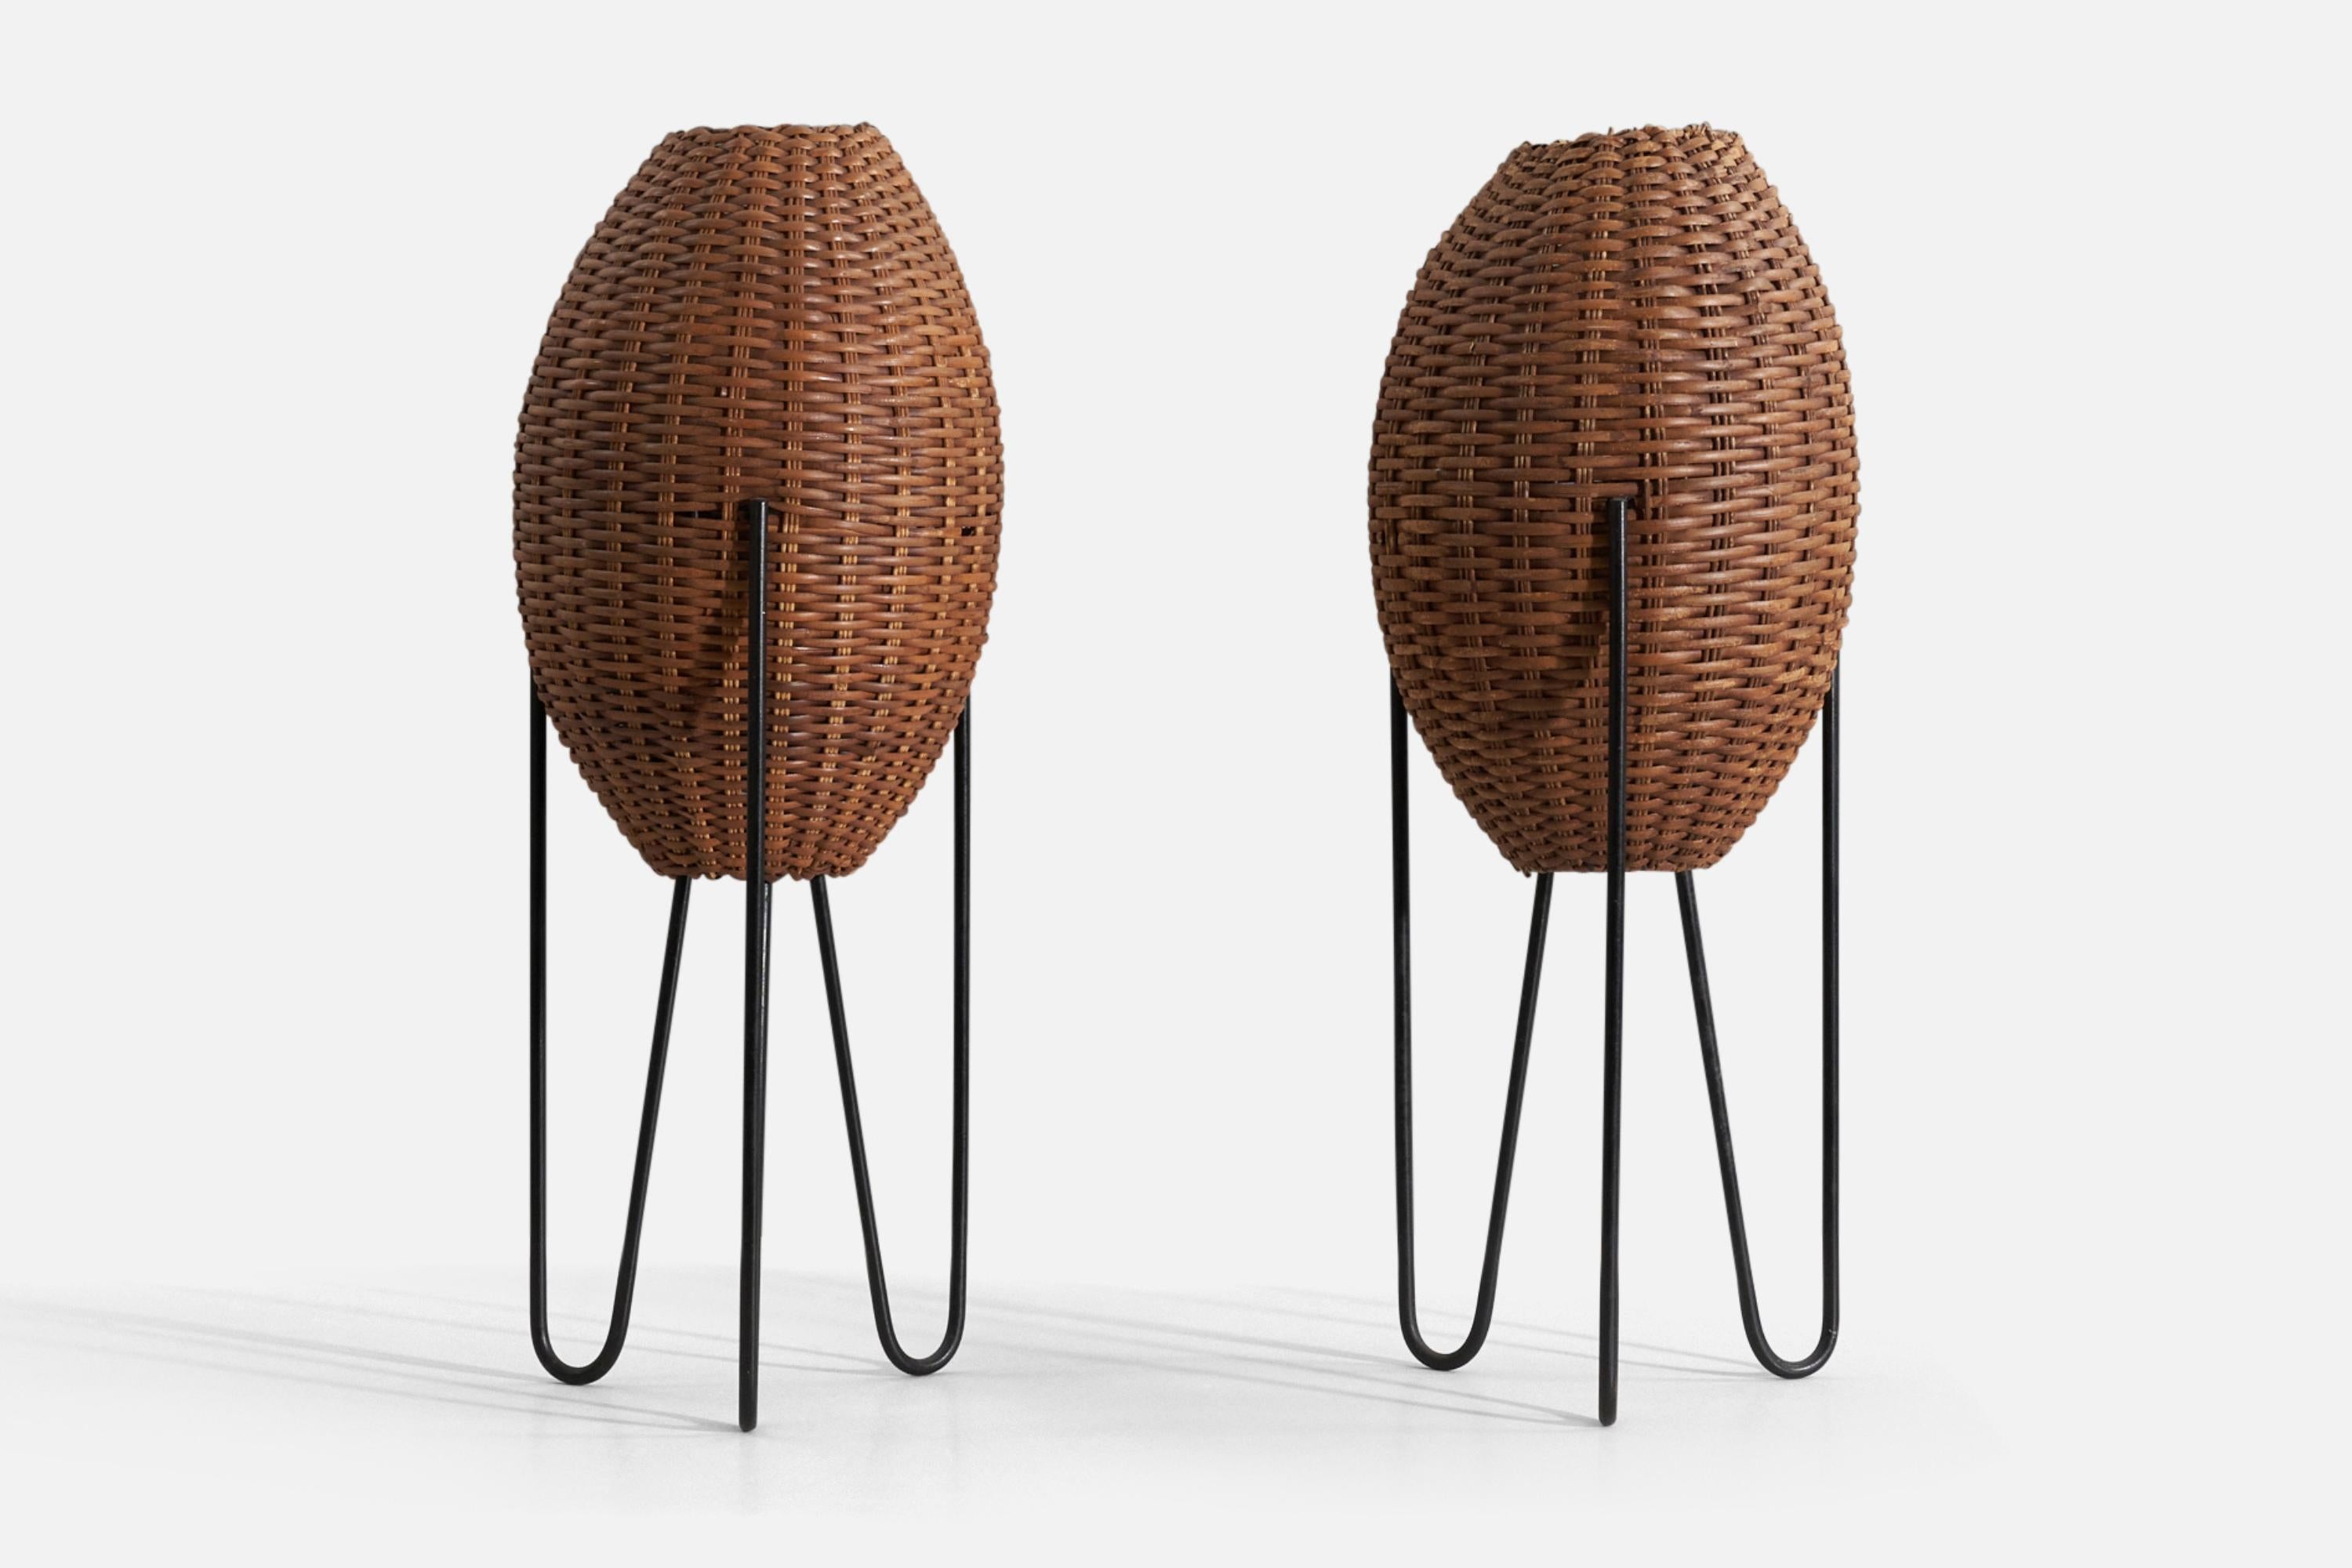 Paul Mayén, Large Table Lamps, Wicker, Enameled Metal, United States, c. 1965 In Good Condition For Sale In High Point, NC